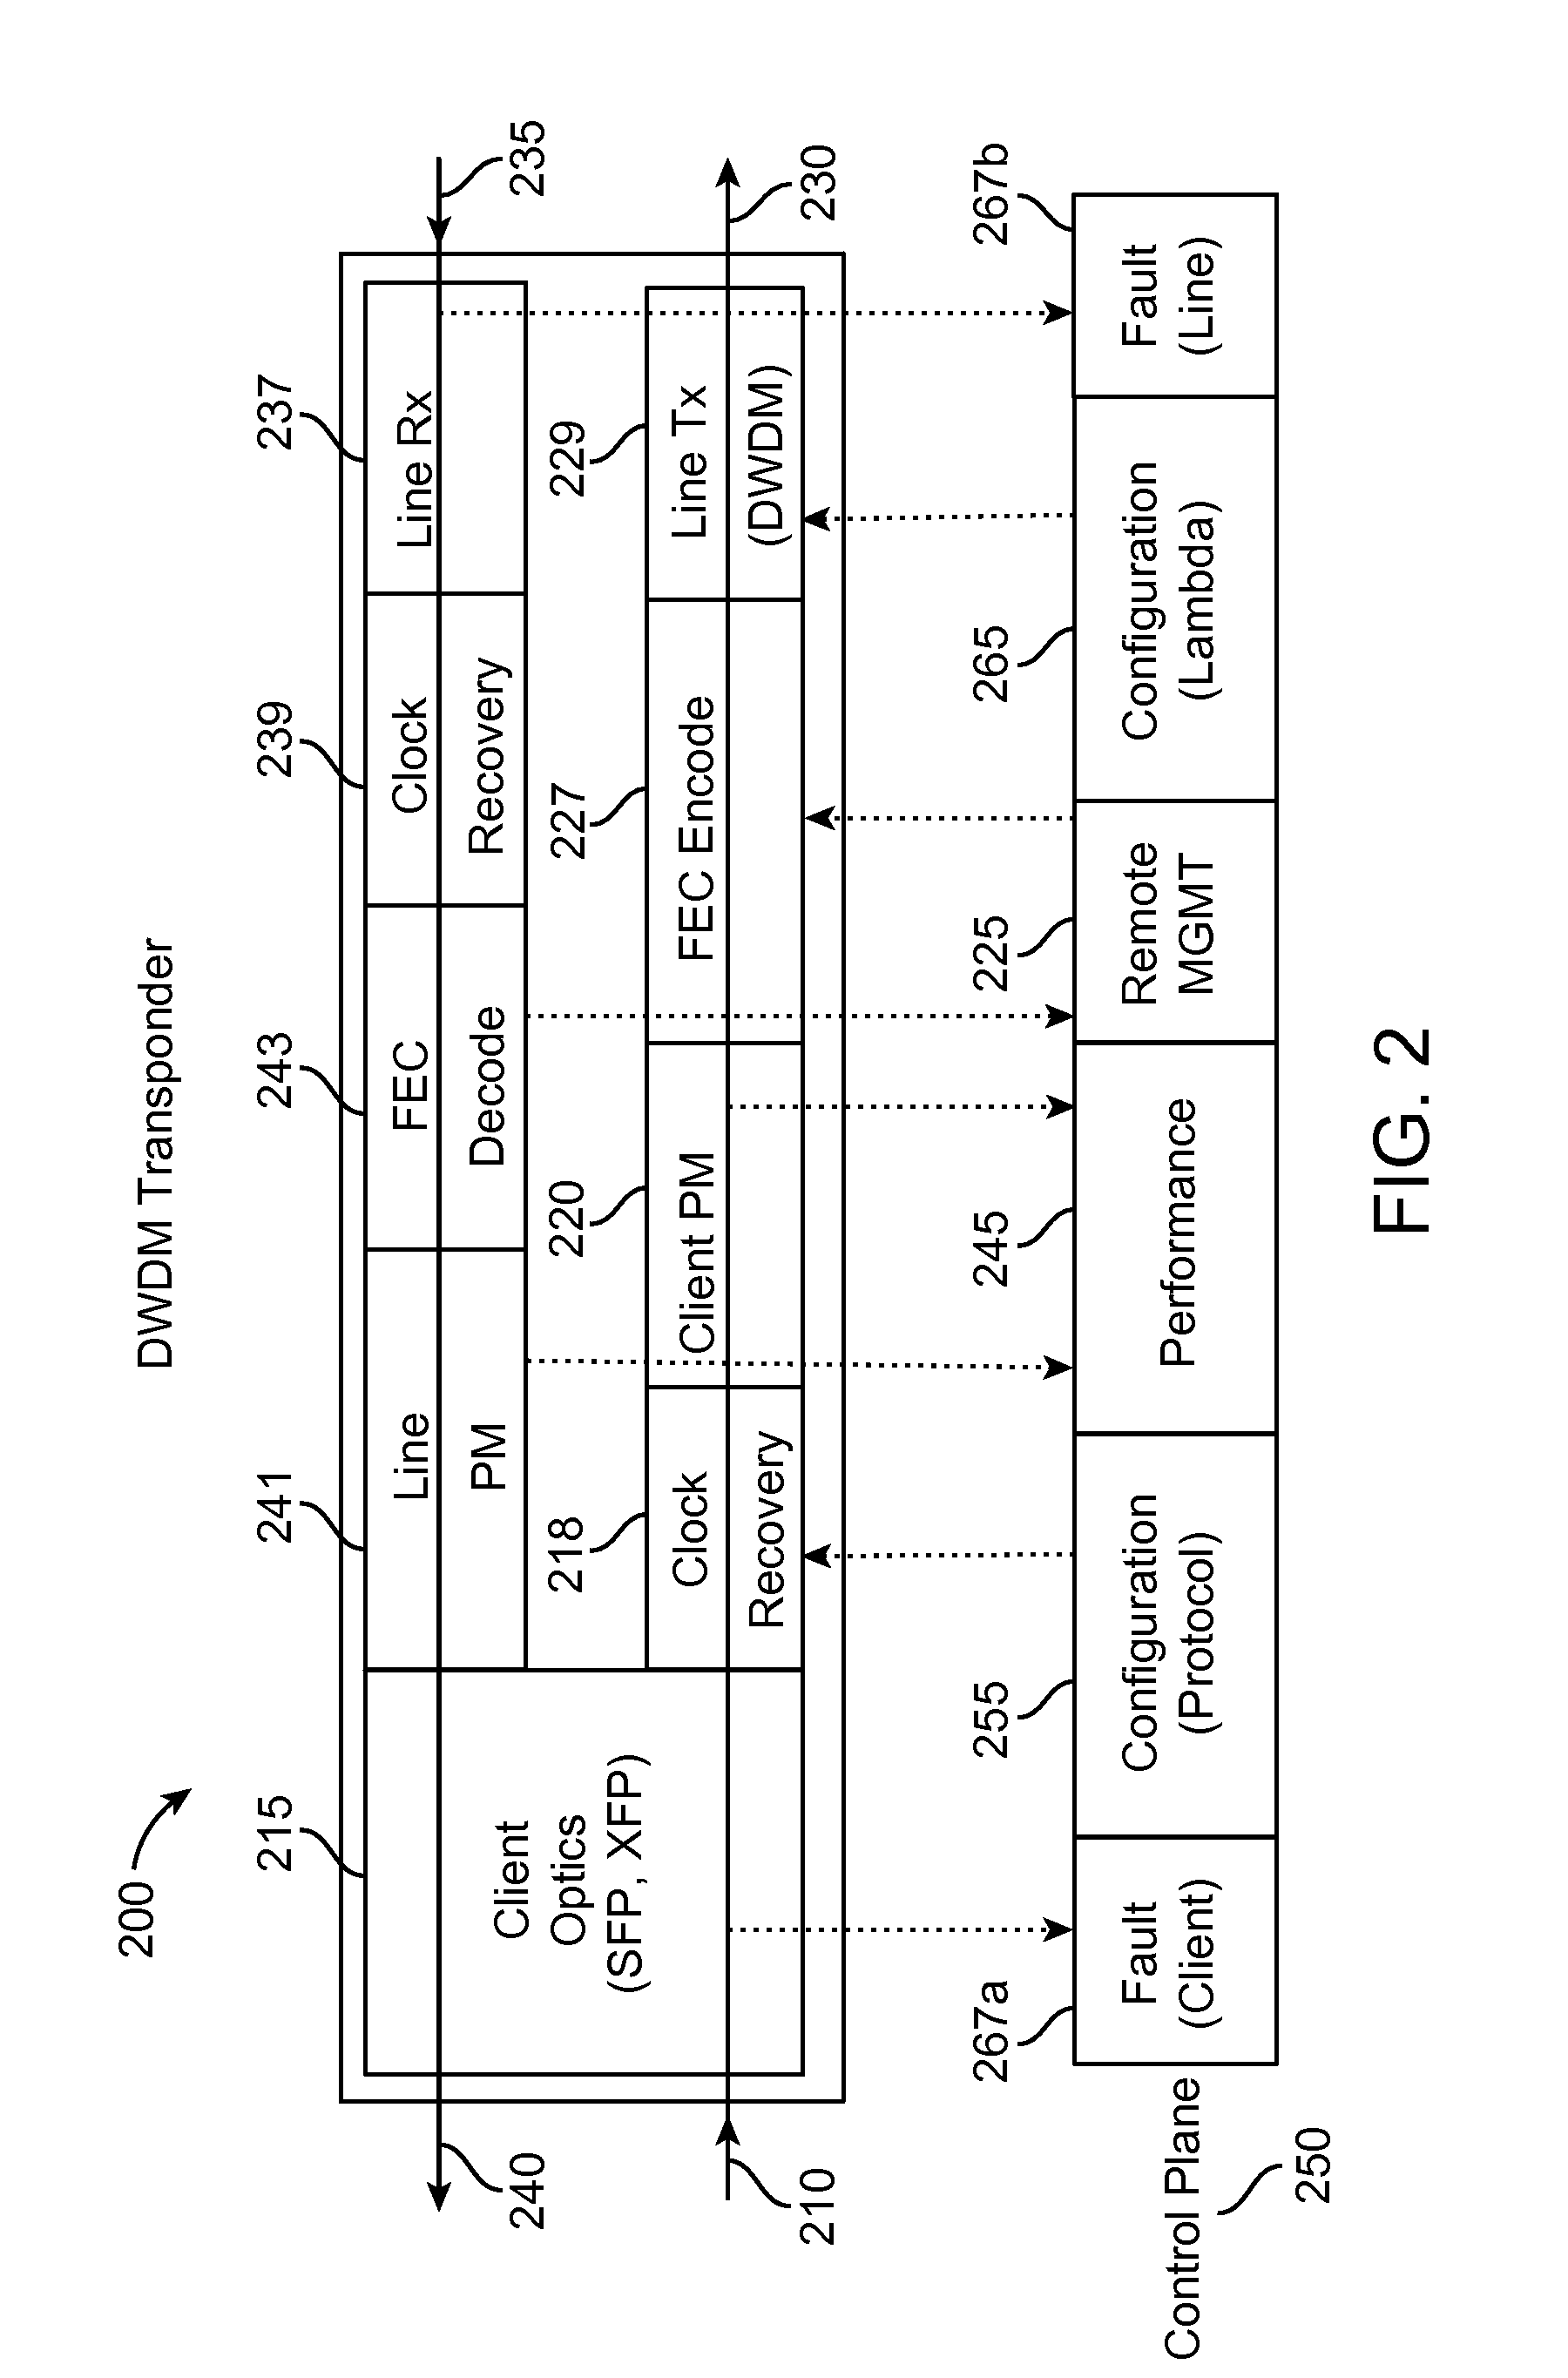 Optical Subchannel-Based Cyclical Filter Architecture